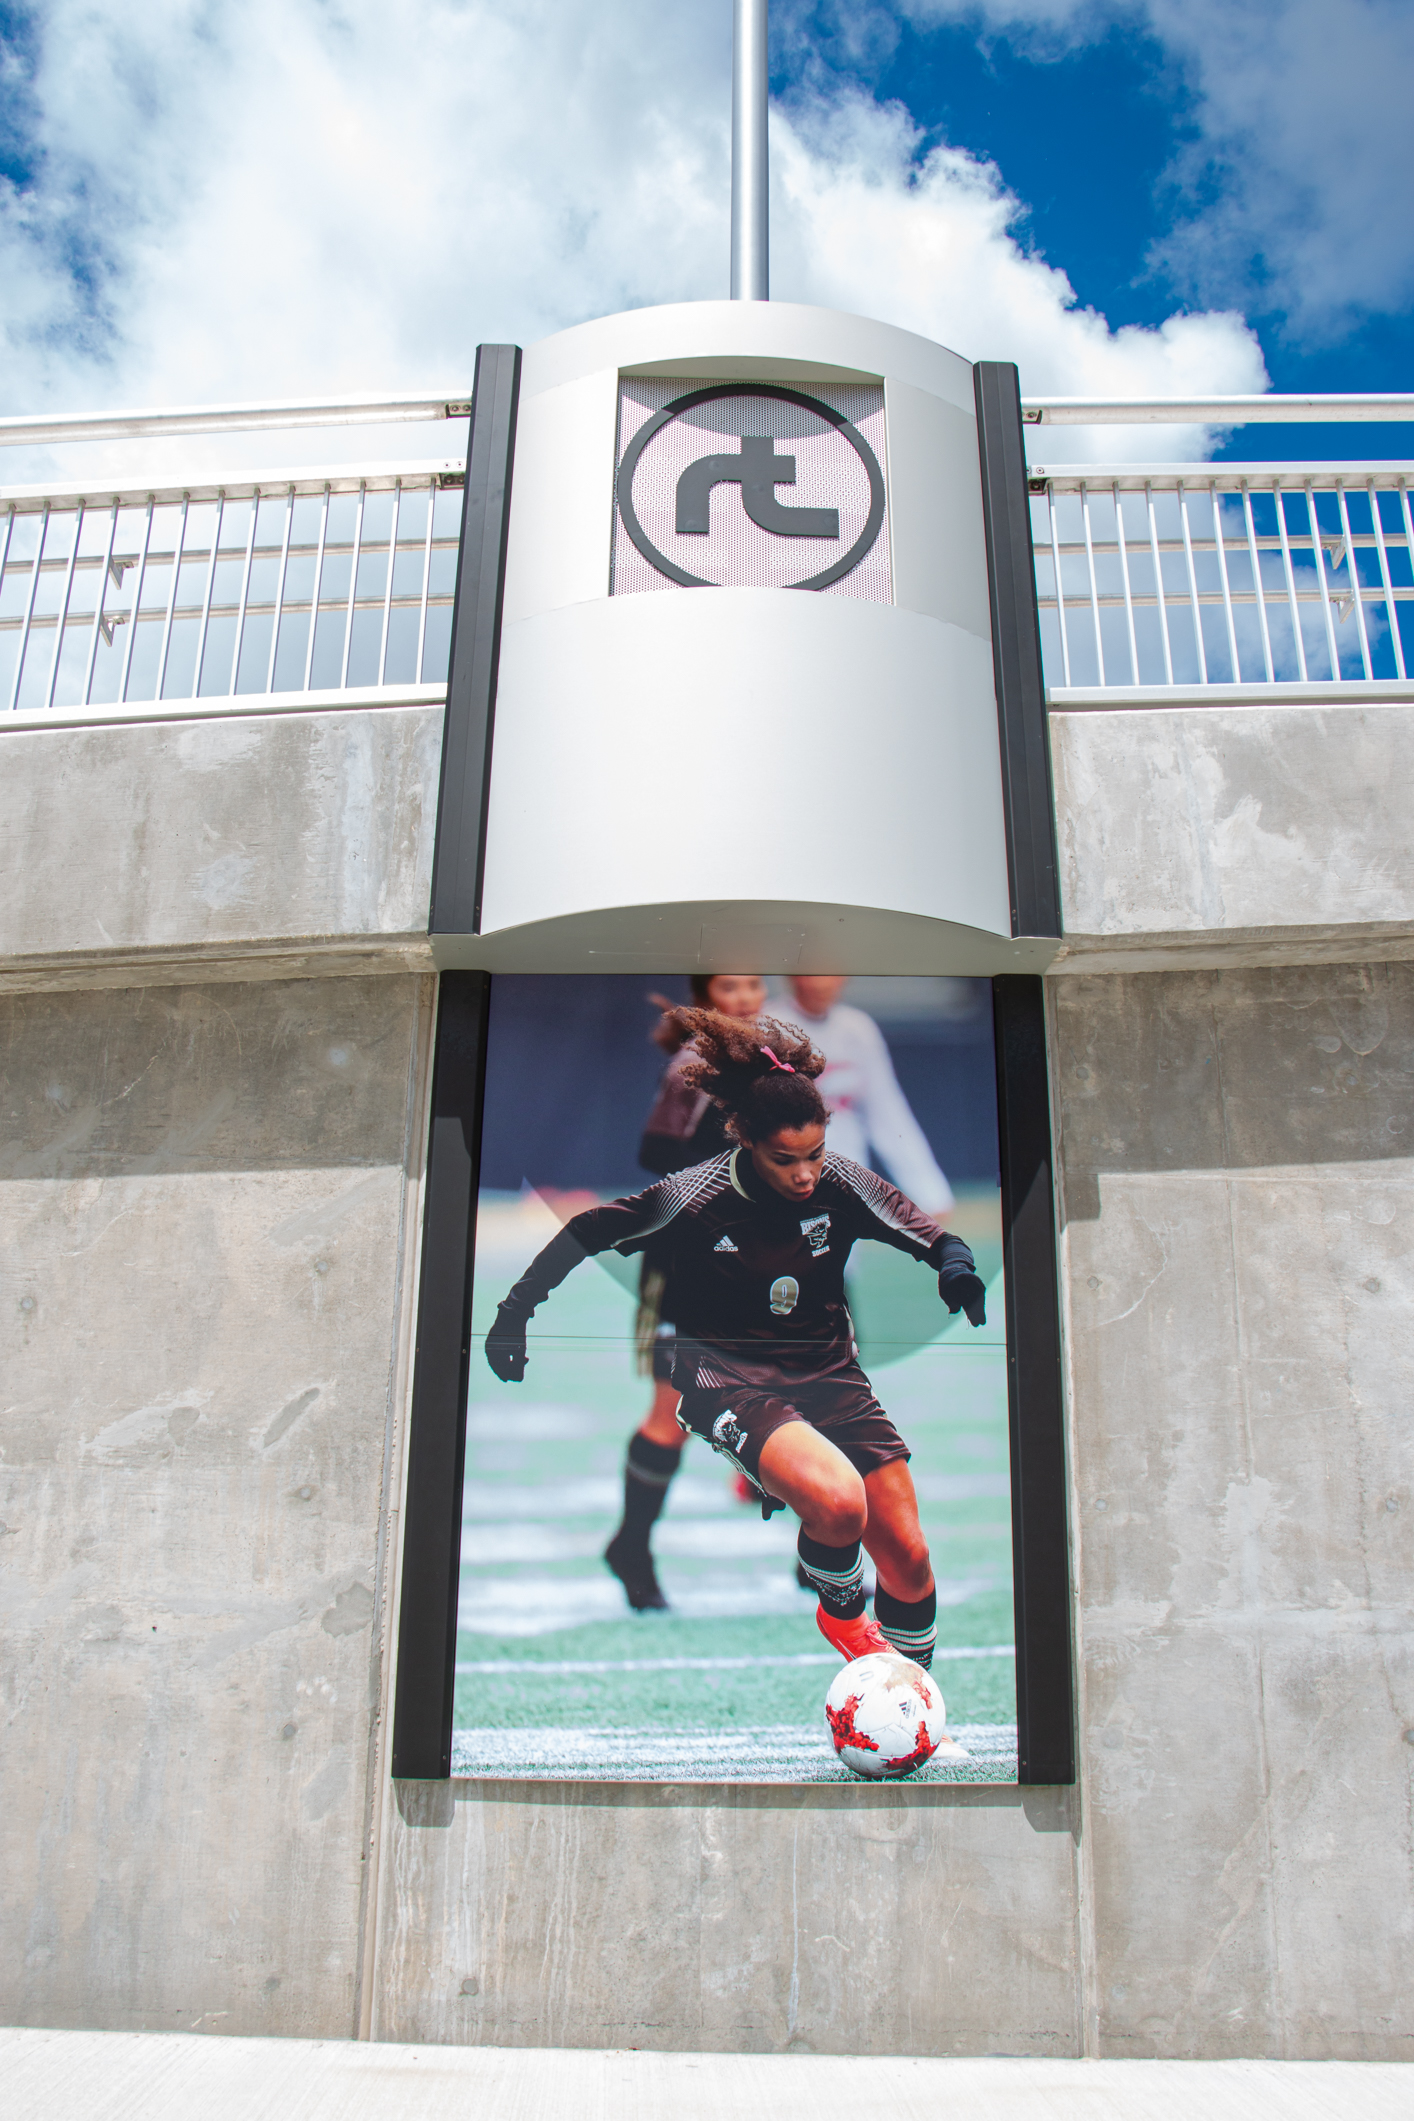 A woman playing soccer is displayed in an image on a concrete wall